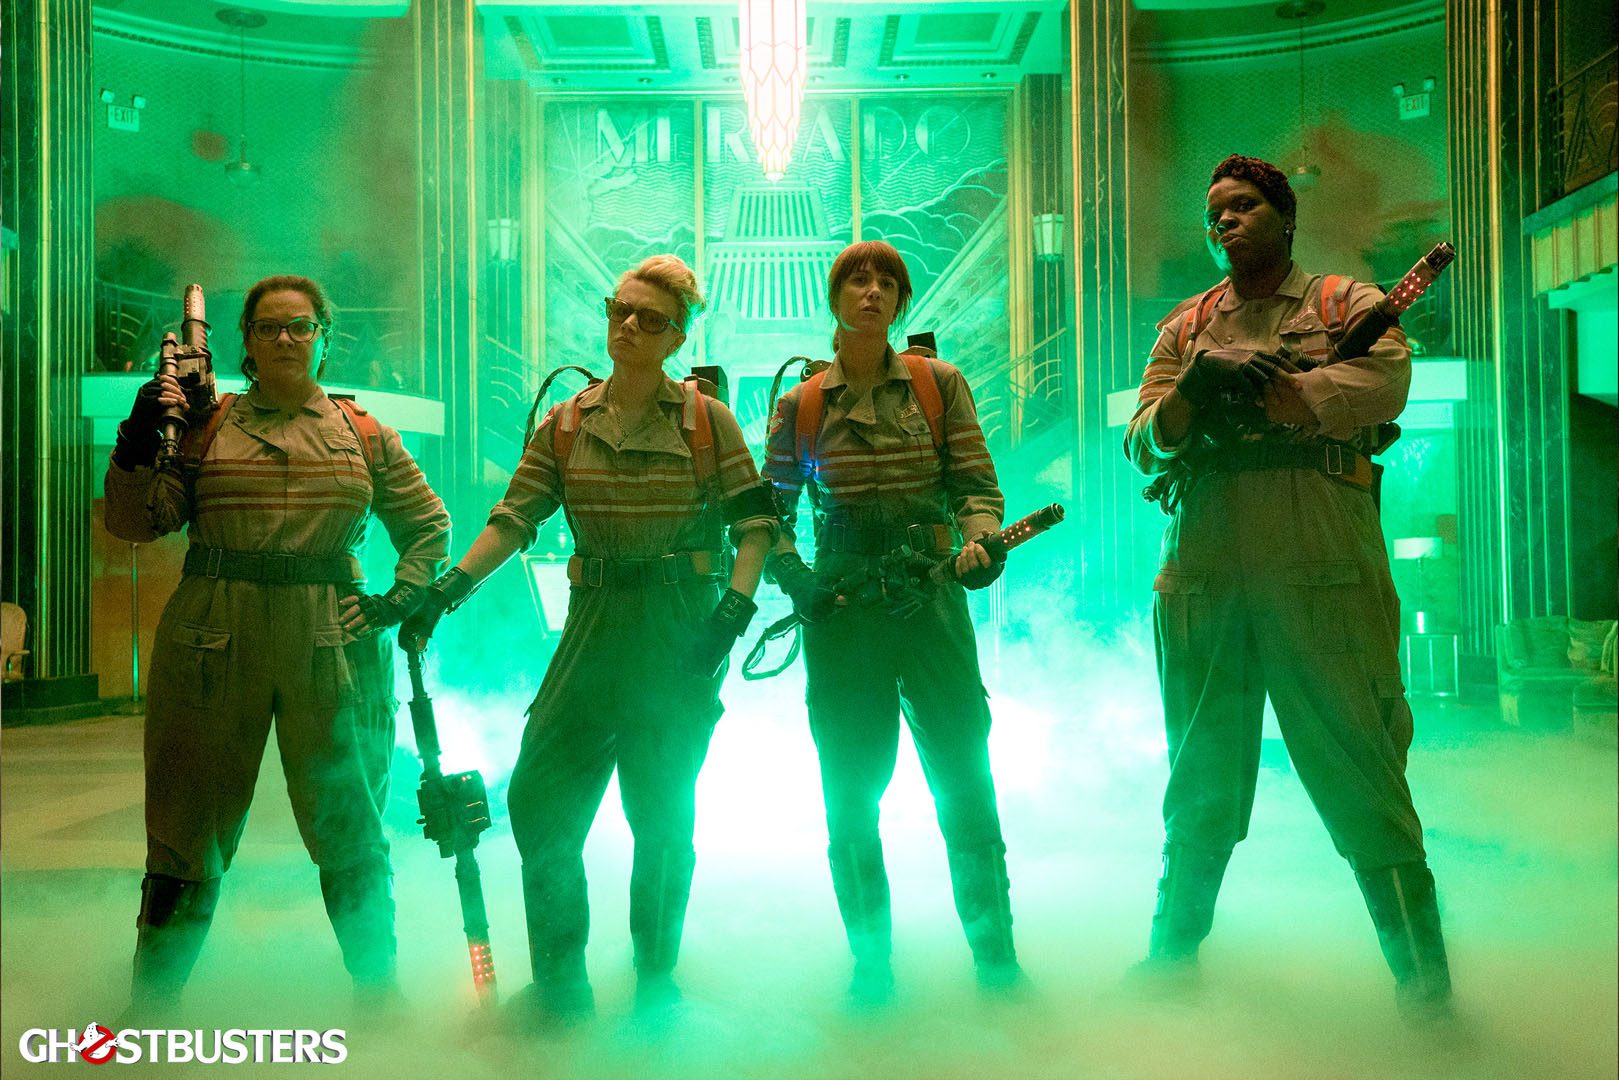 WATCH: ‘Ghostbusters’ reboot trailer shows new all-female cast in action